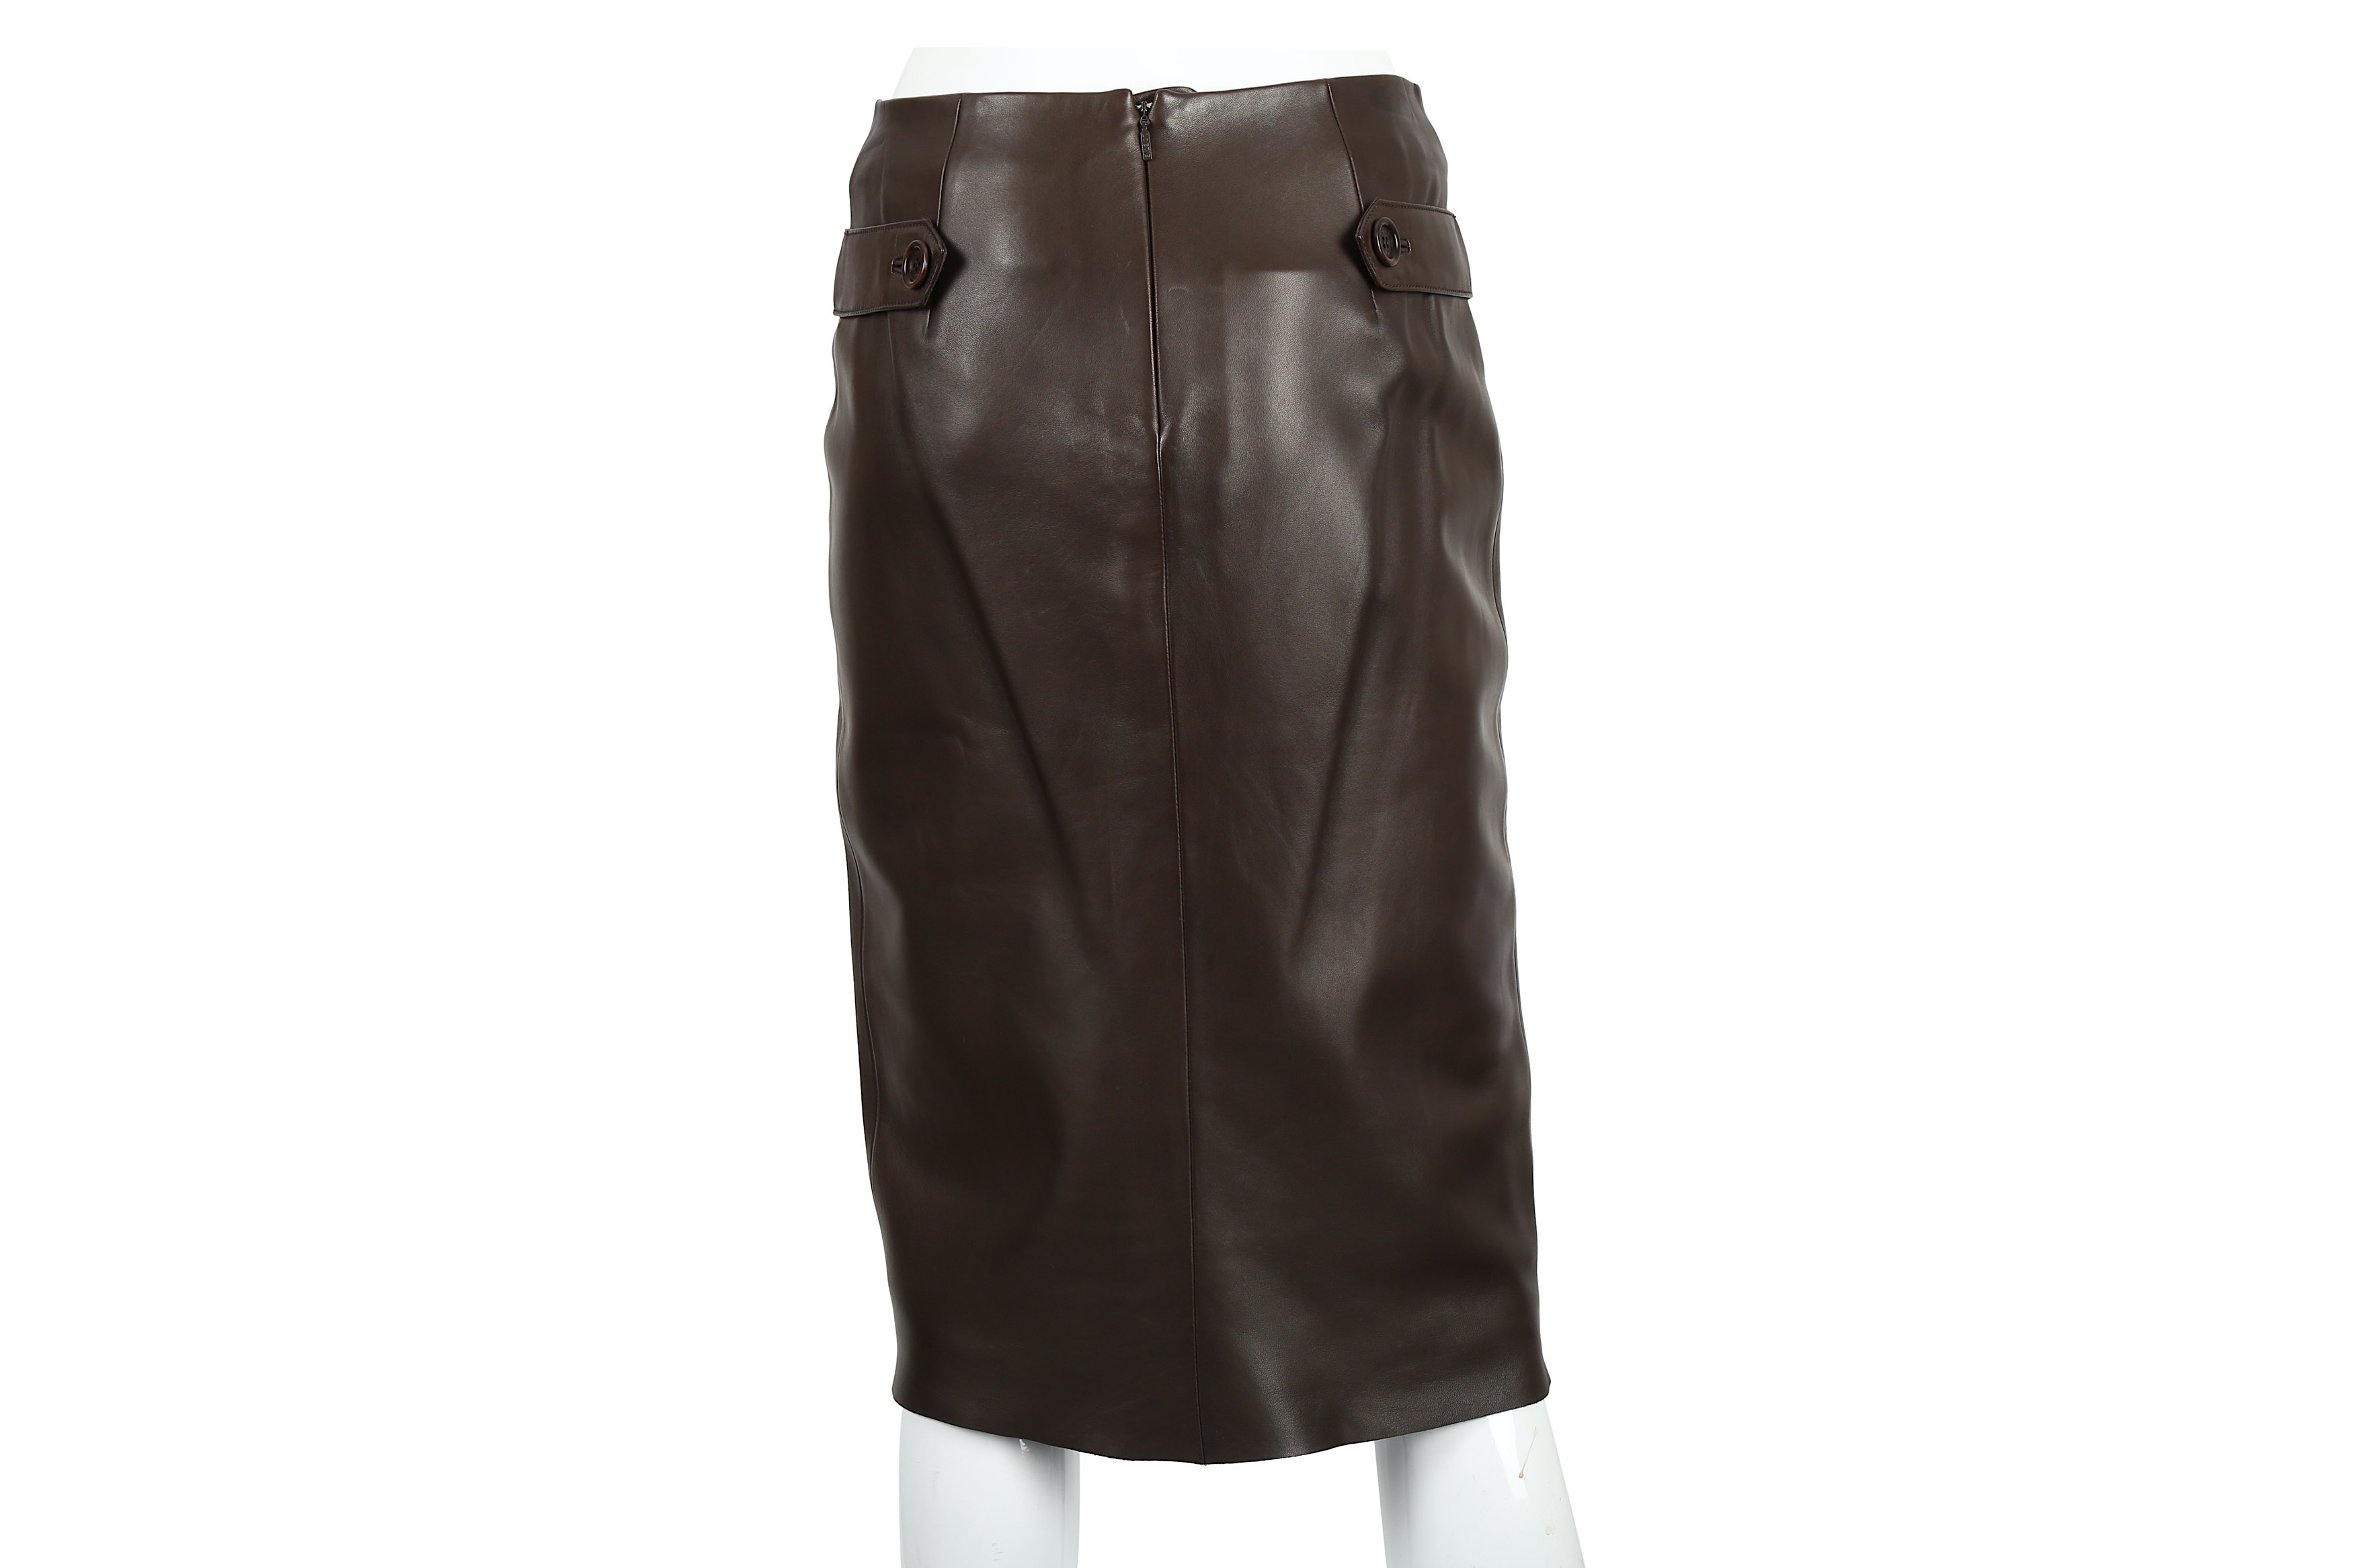 Lot 206 - Loewe Brown Leather Skirt - Size 38